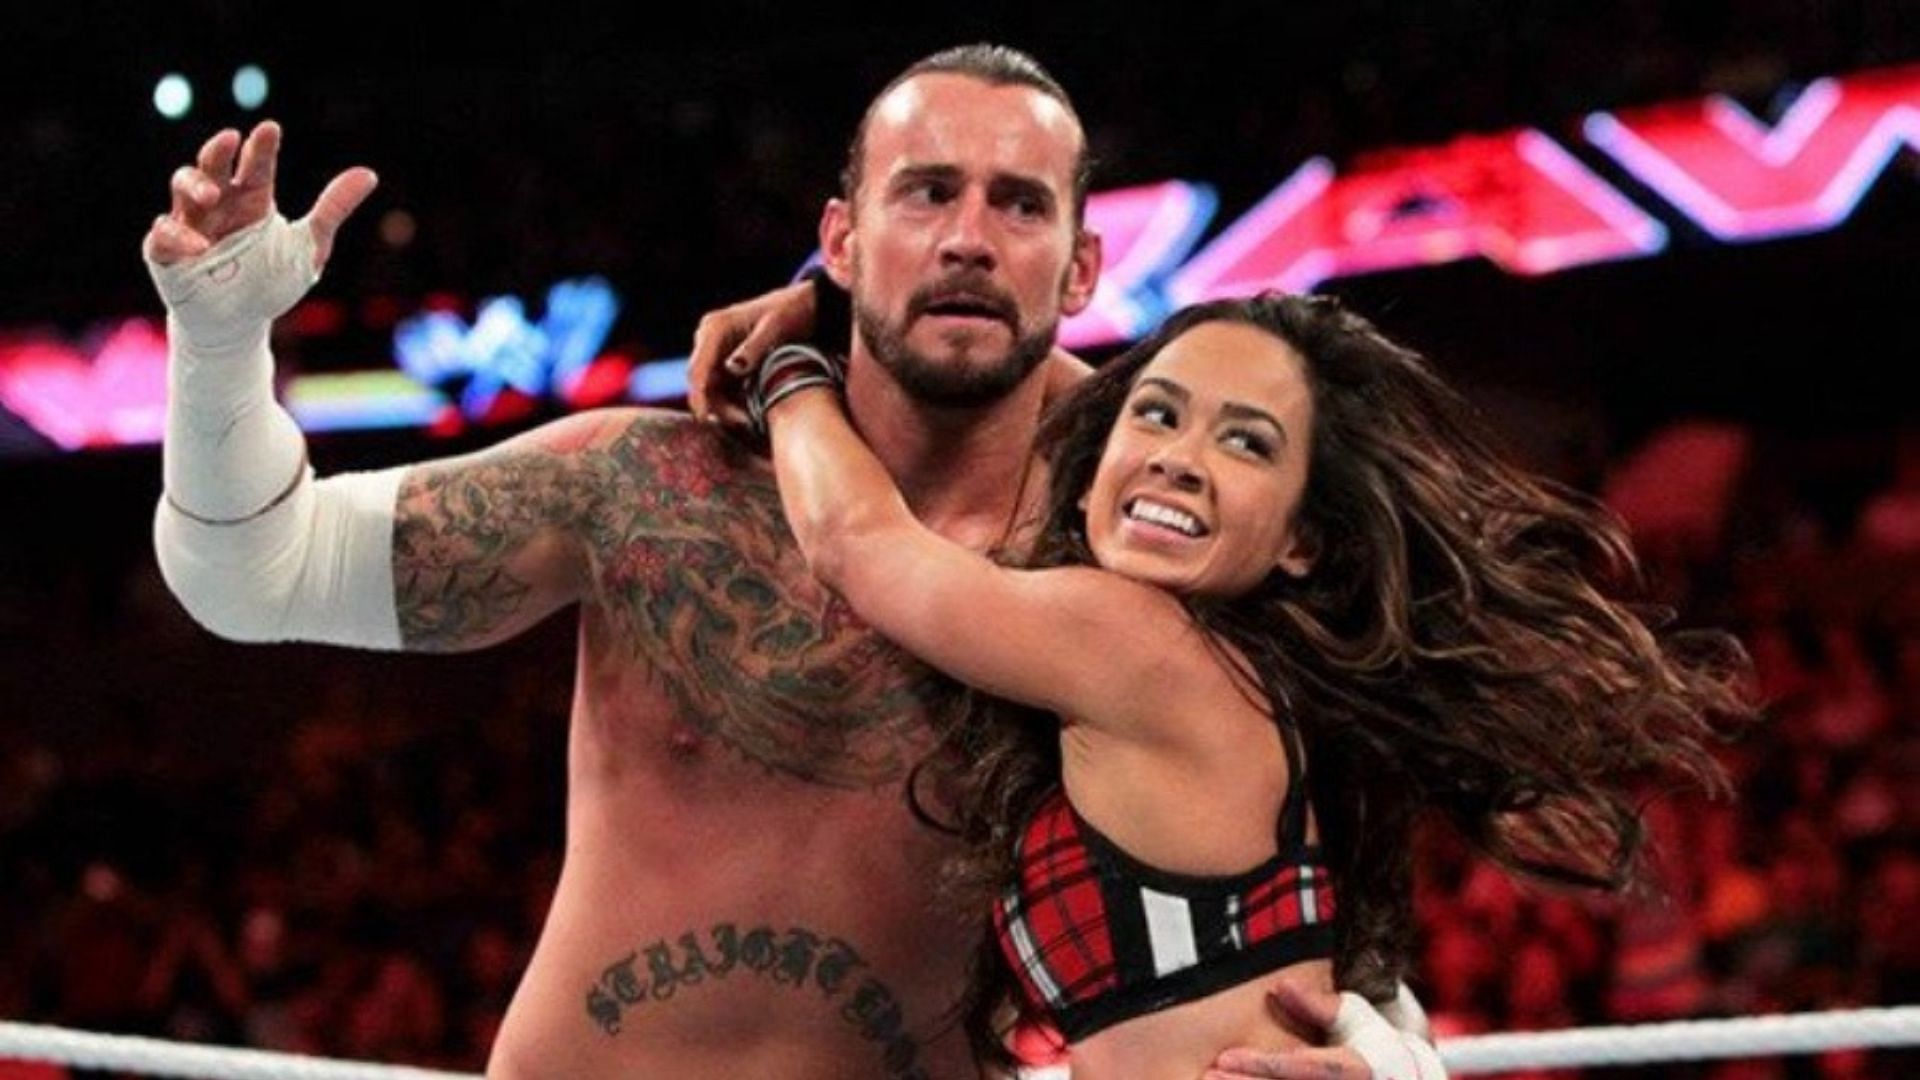 CM Punk has sent a message to his wife